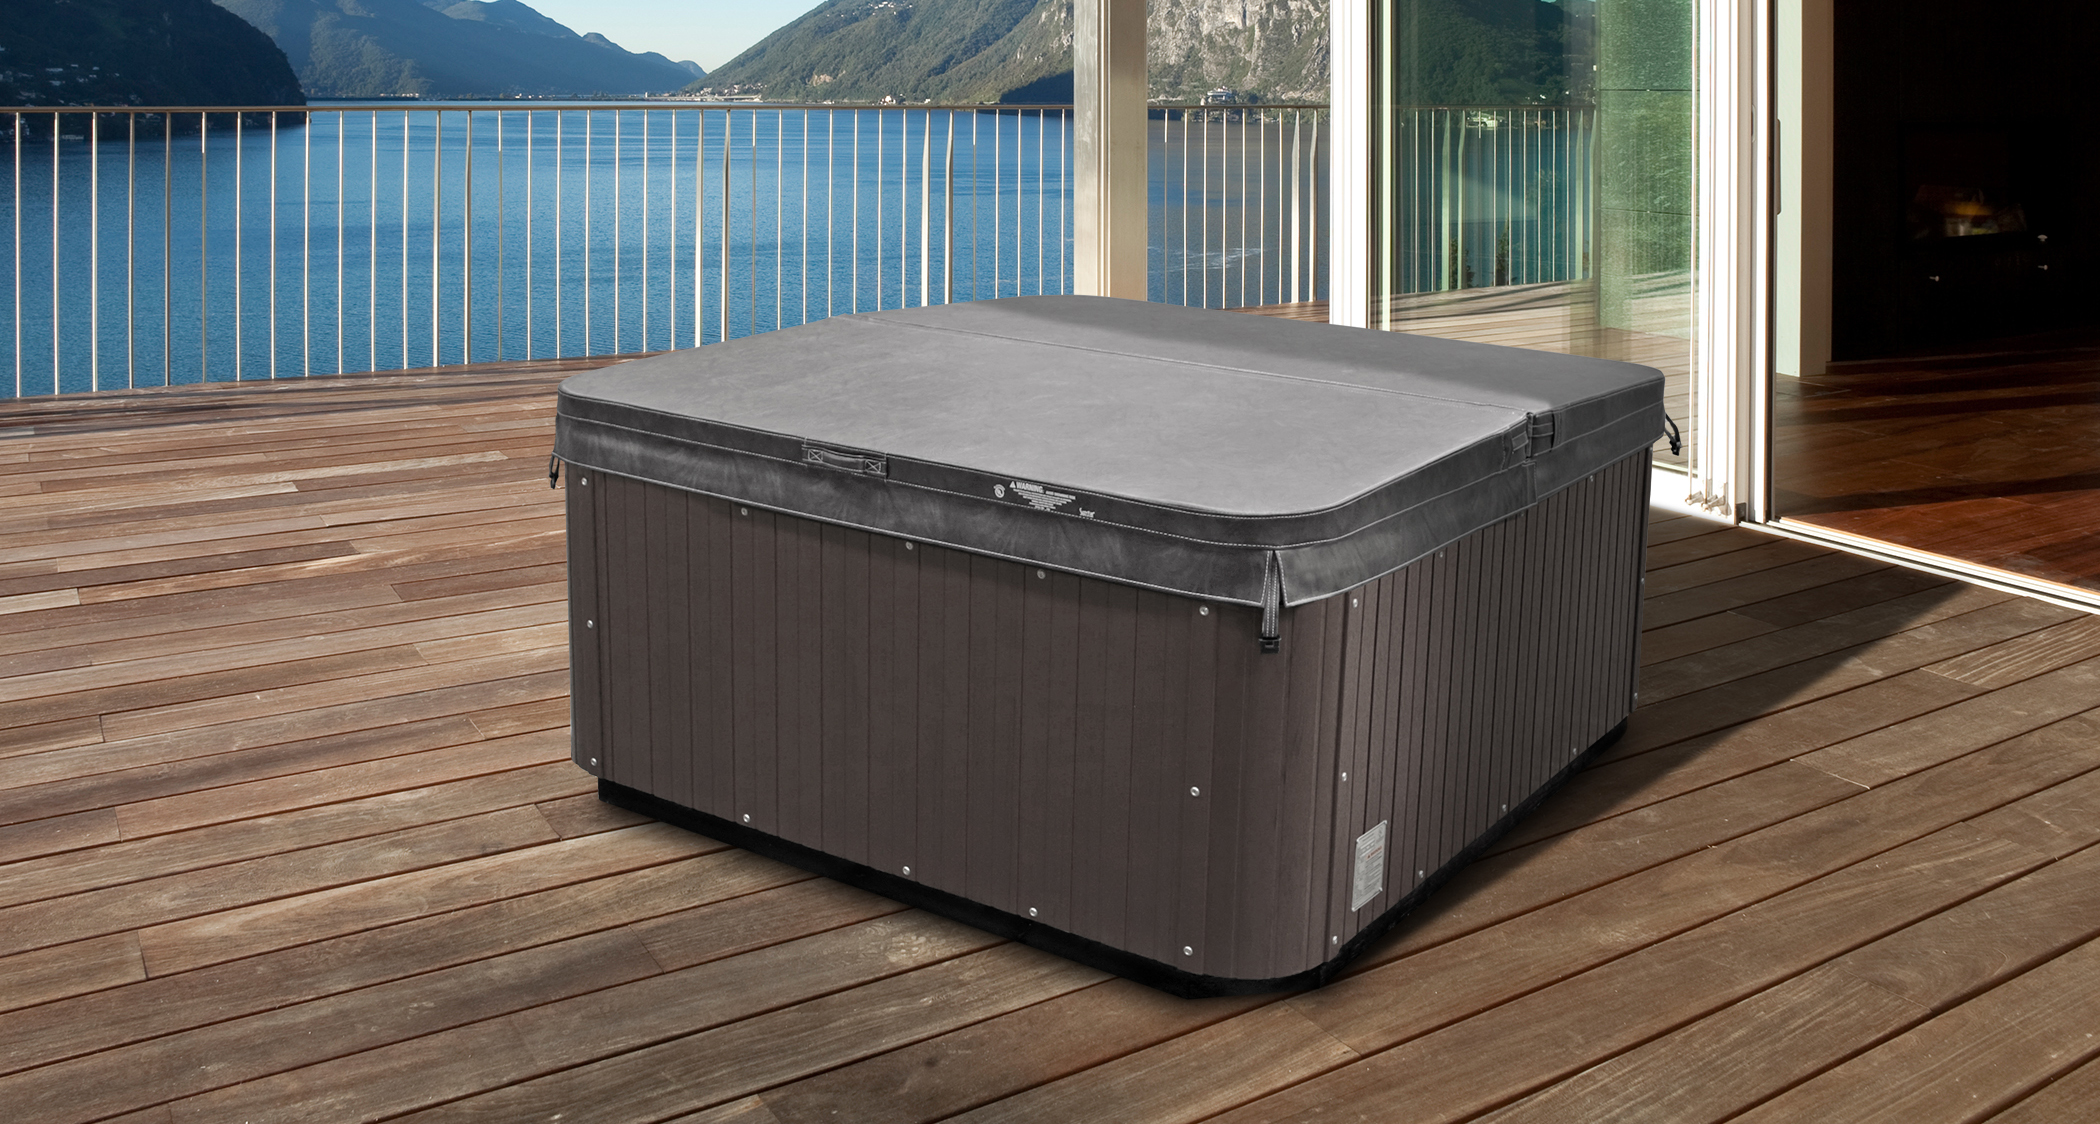 Hot tub on a Balcony Overlooking a Lake with Gray Cal Spas Spas Spa Cover